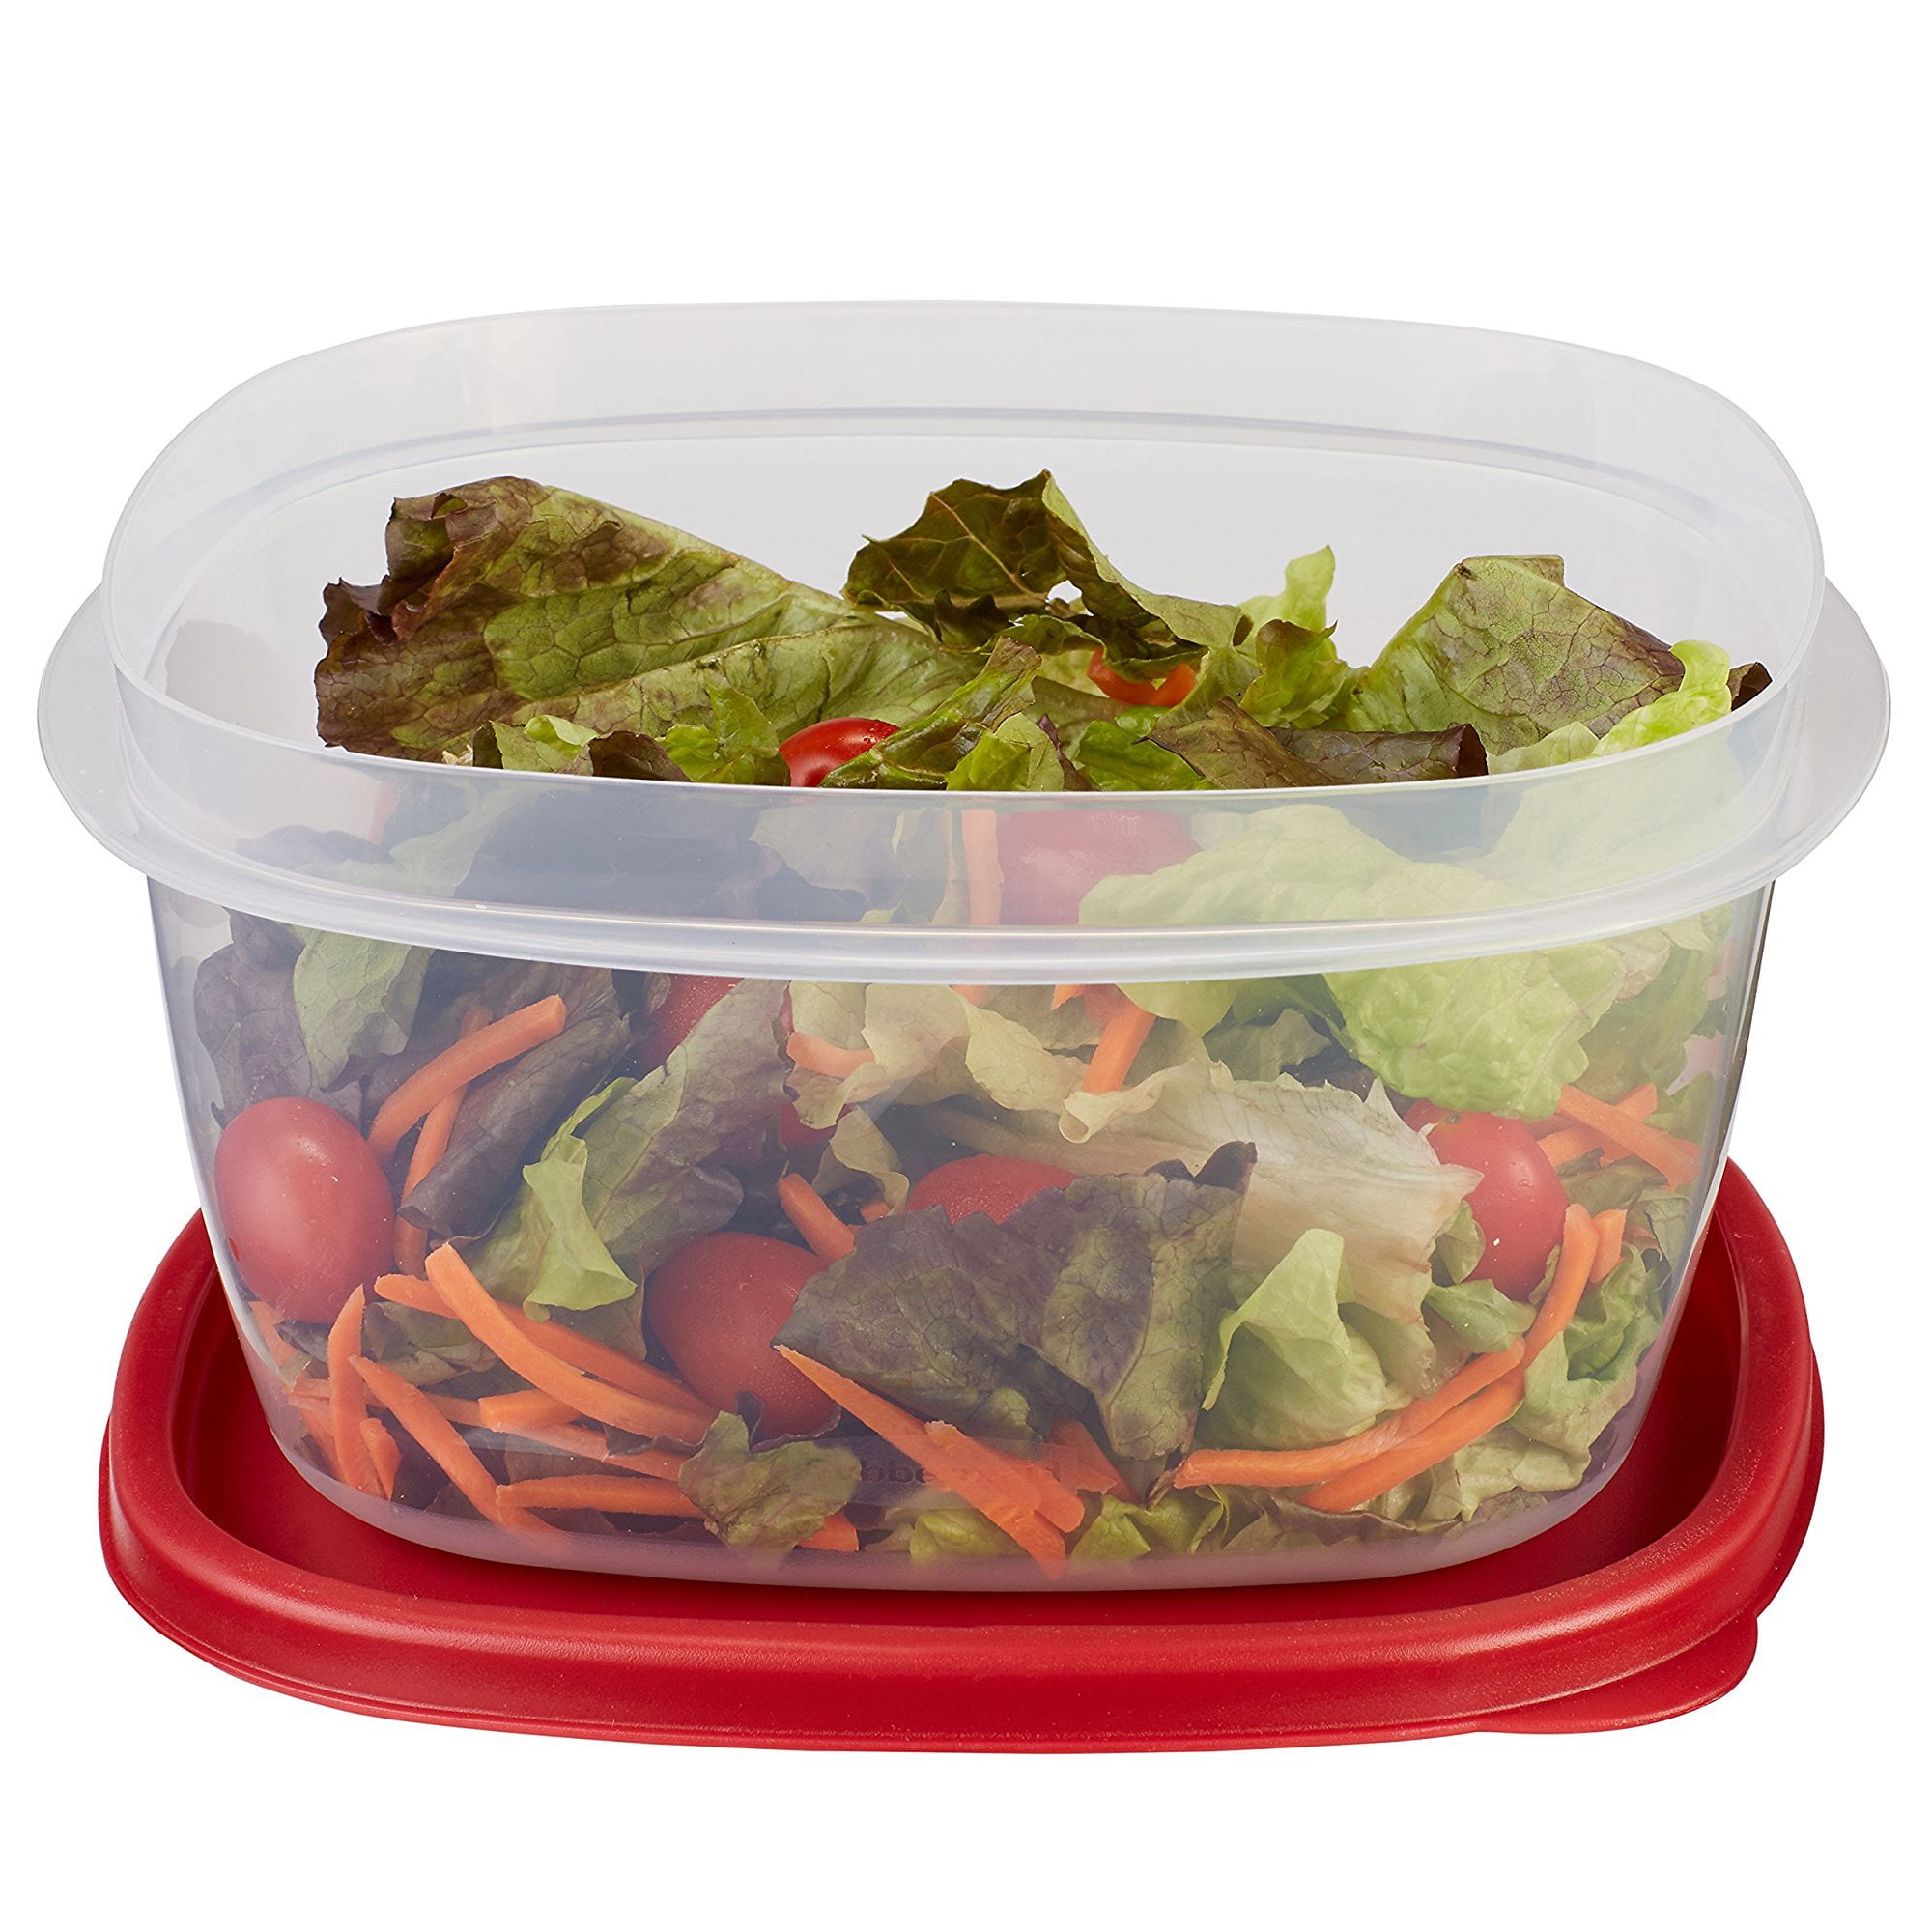 Rubbermaid® Easy Find Lids™ Ice Blue Food Container, 1 ct / 14 c - Ralphs